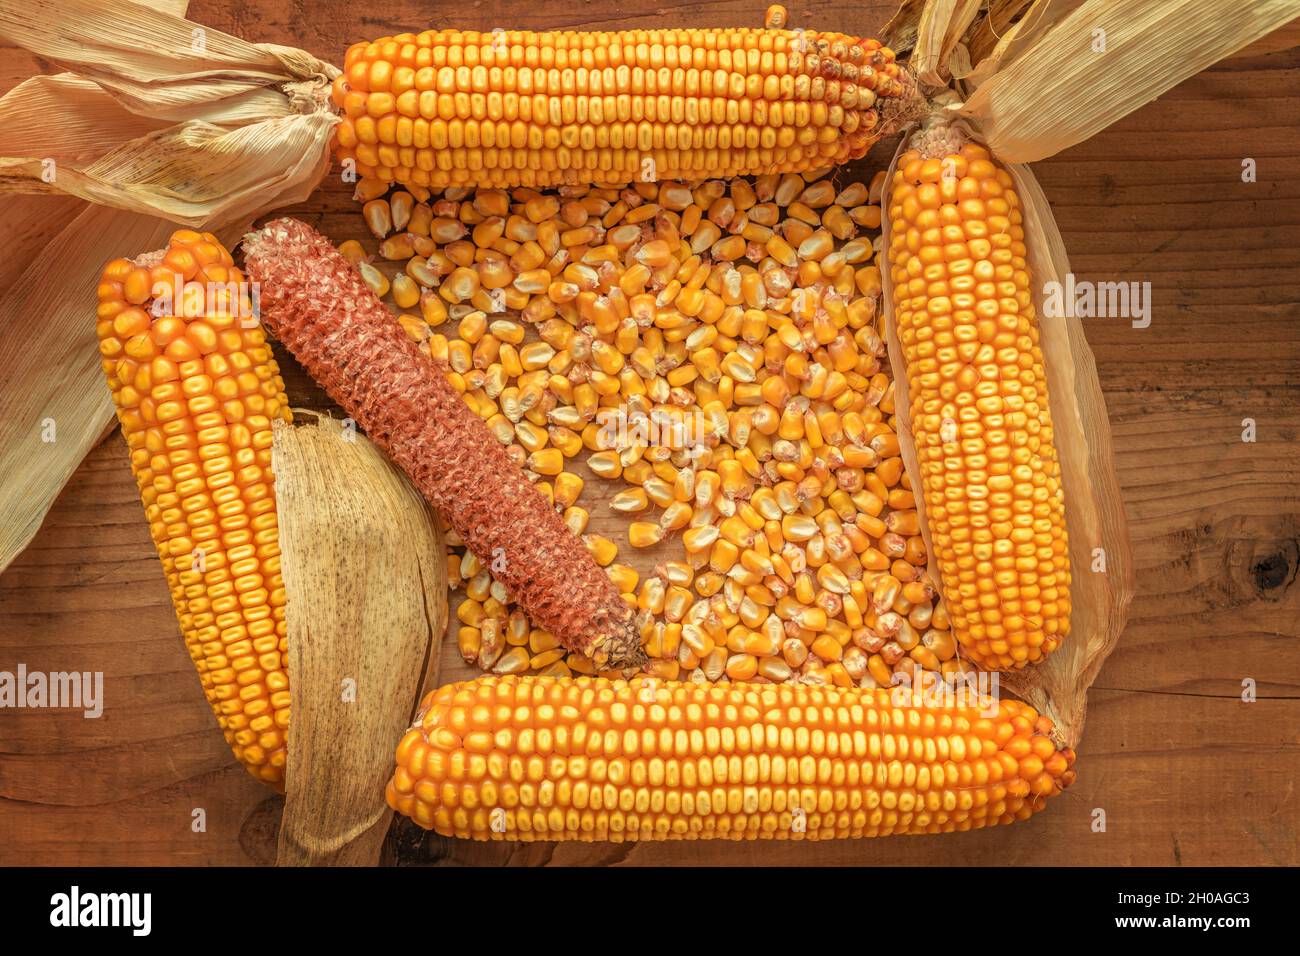 Corncobs and grain on rustic wooden background, top view of harvested maize crops for agricultural and cultivation concepts Stock Photo